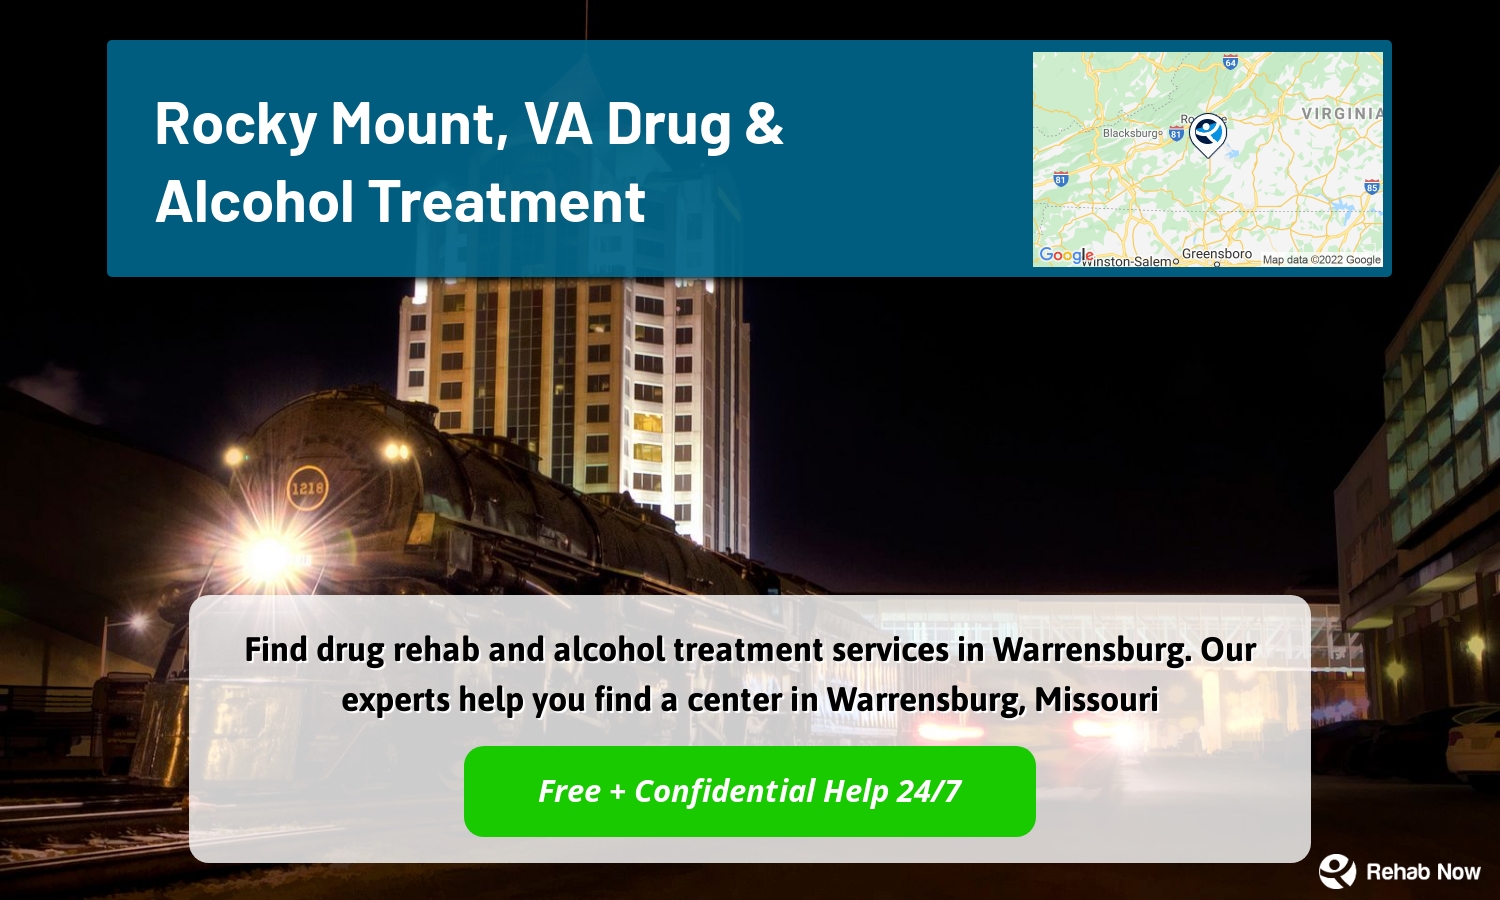 Find drug rehab and alcohol treatment services in Warrensburg. Our experts help you find a center in Warrensburg, Missouri